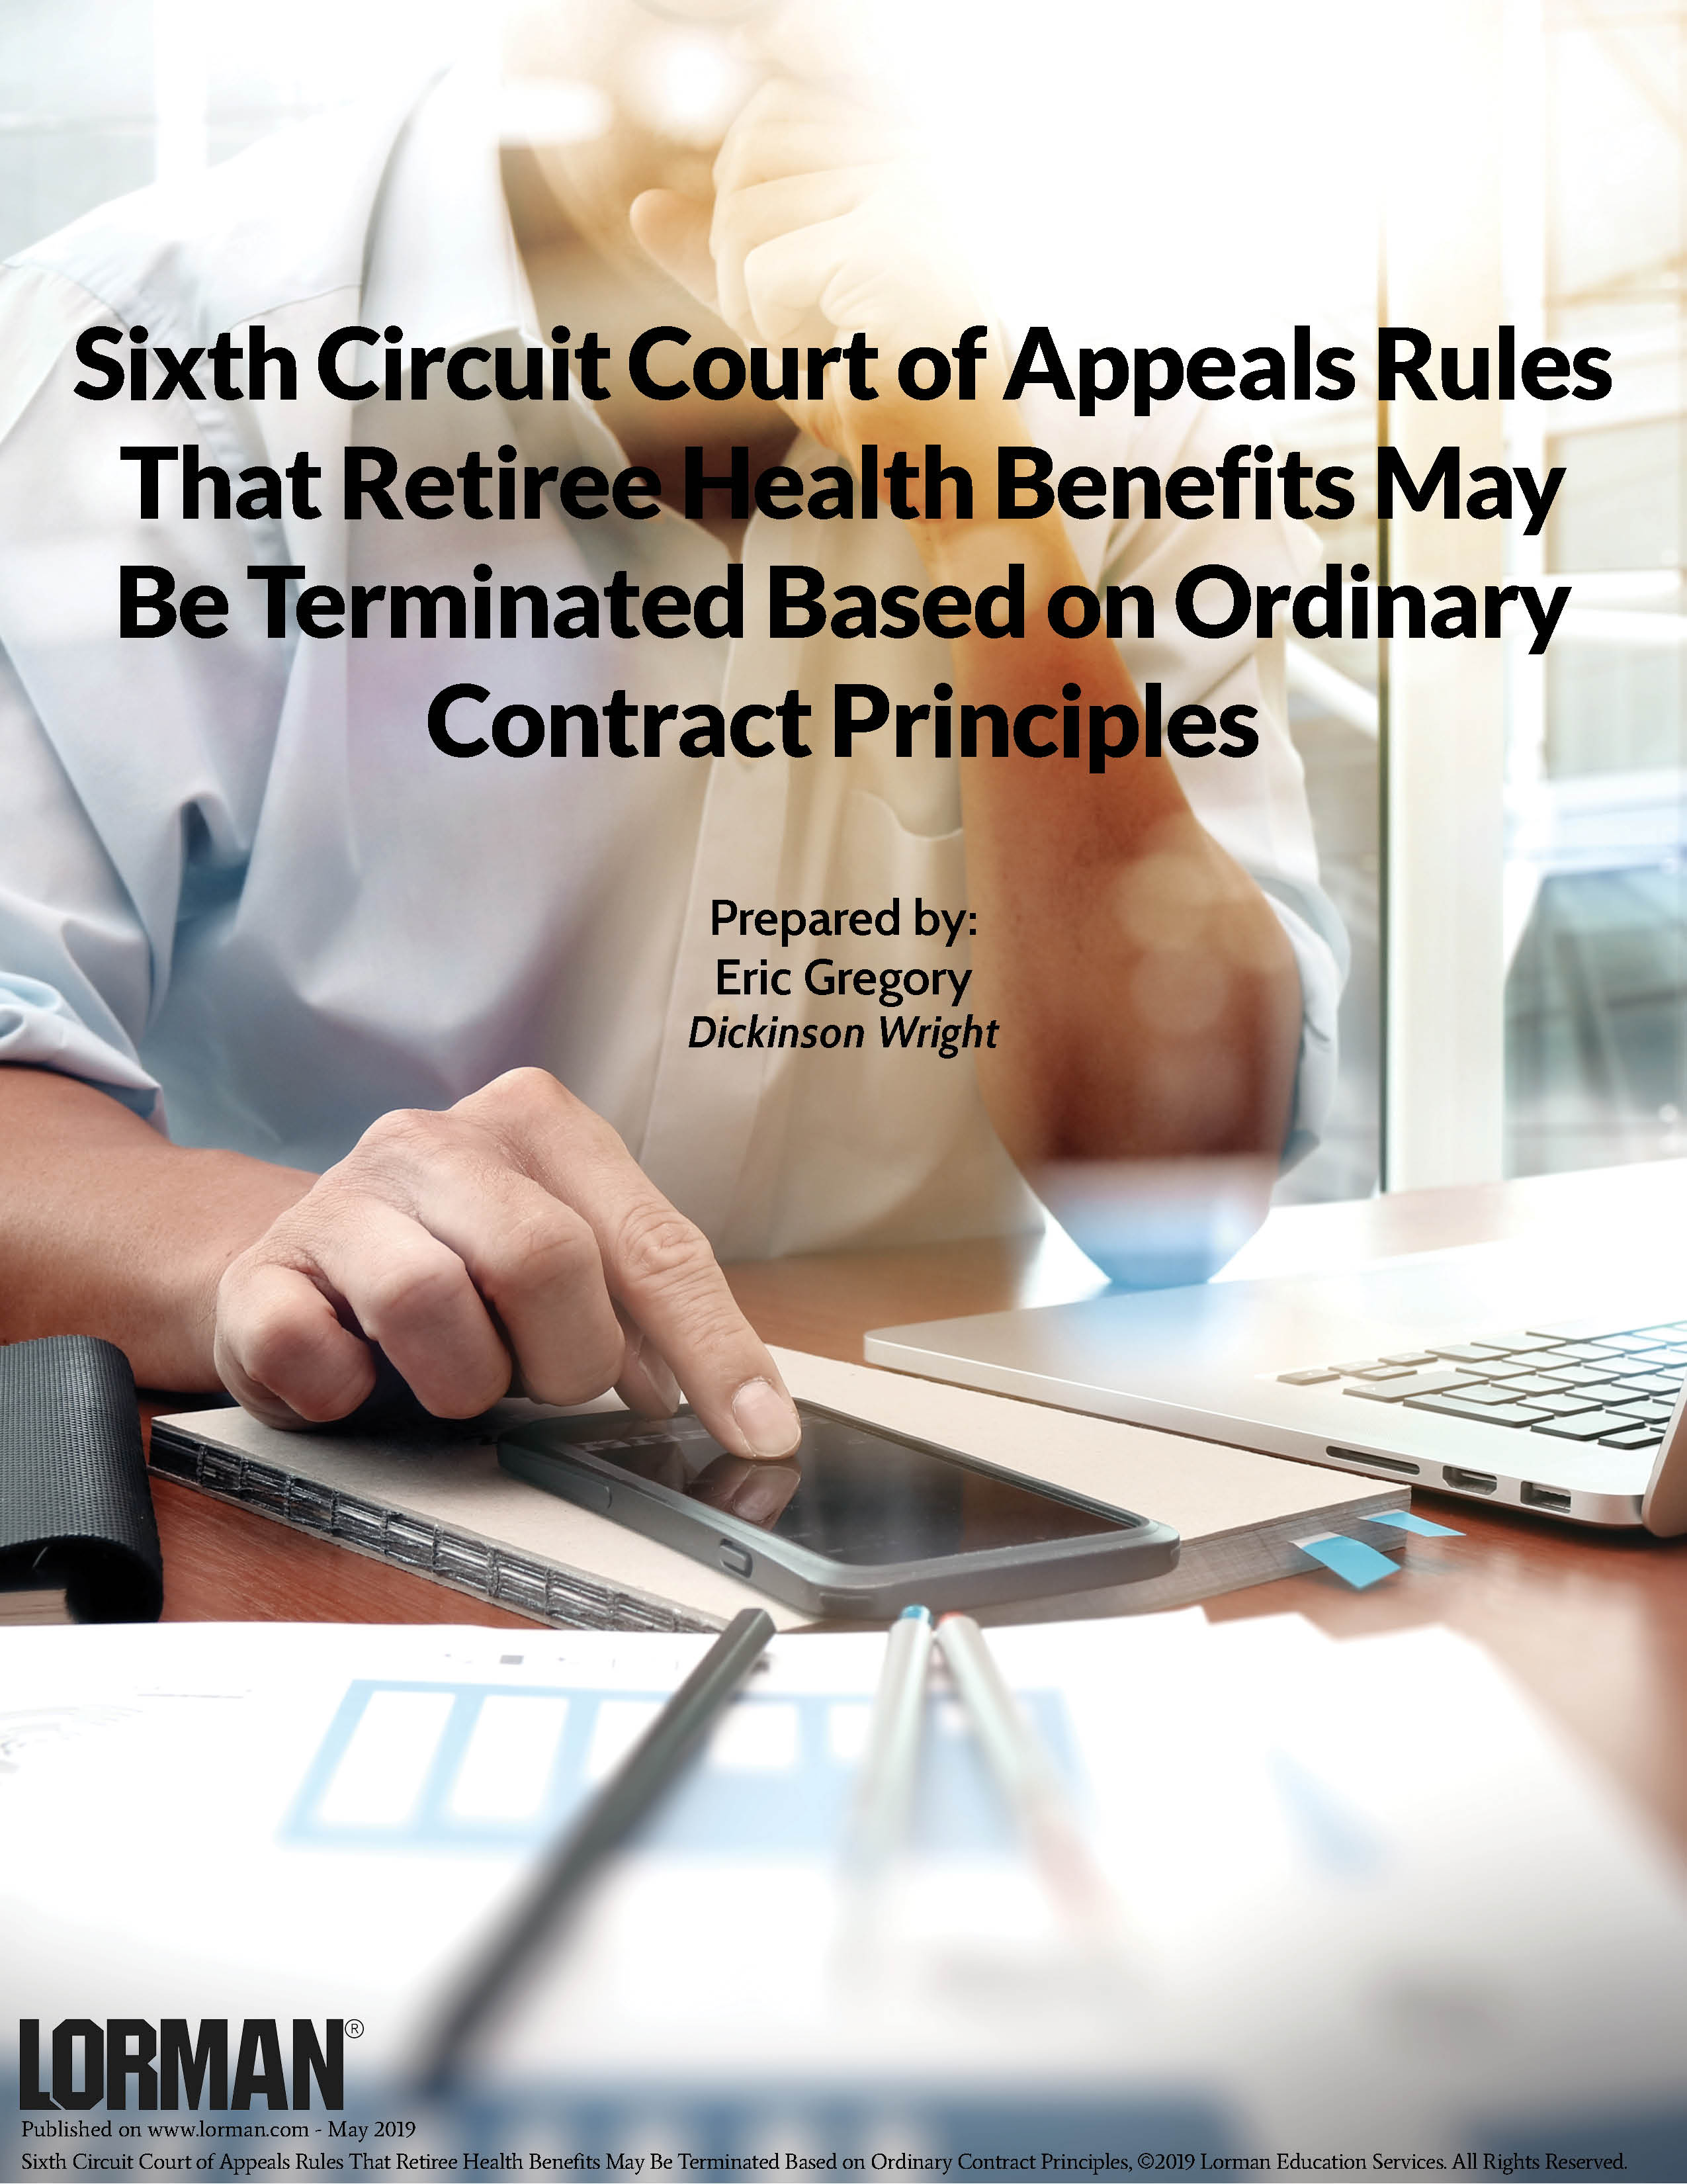 6th Circuit Court Rules Retiree Health Benefits May Be Terminated Based On Contract Principles